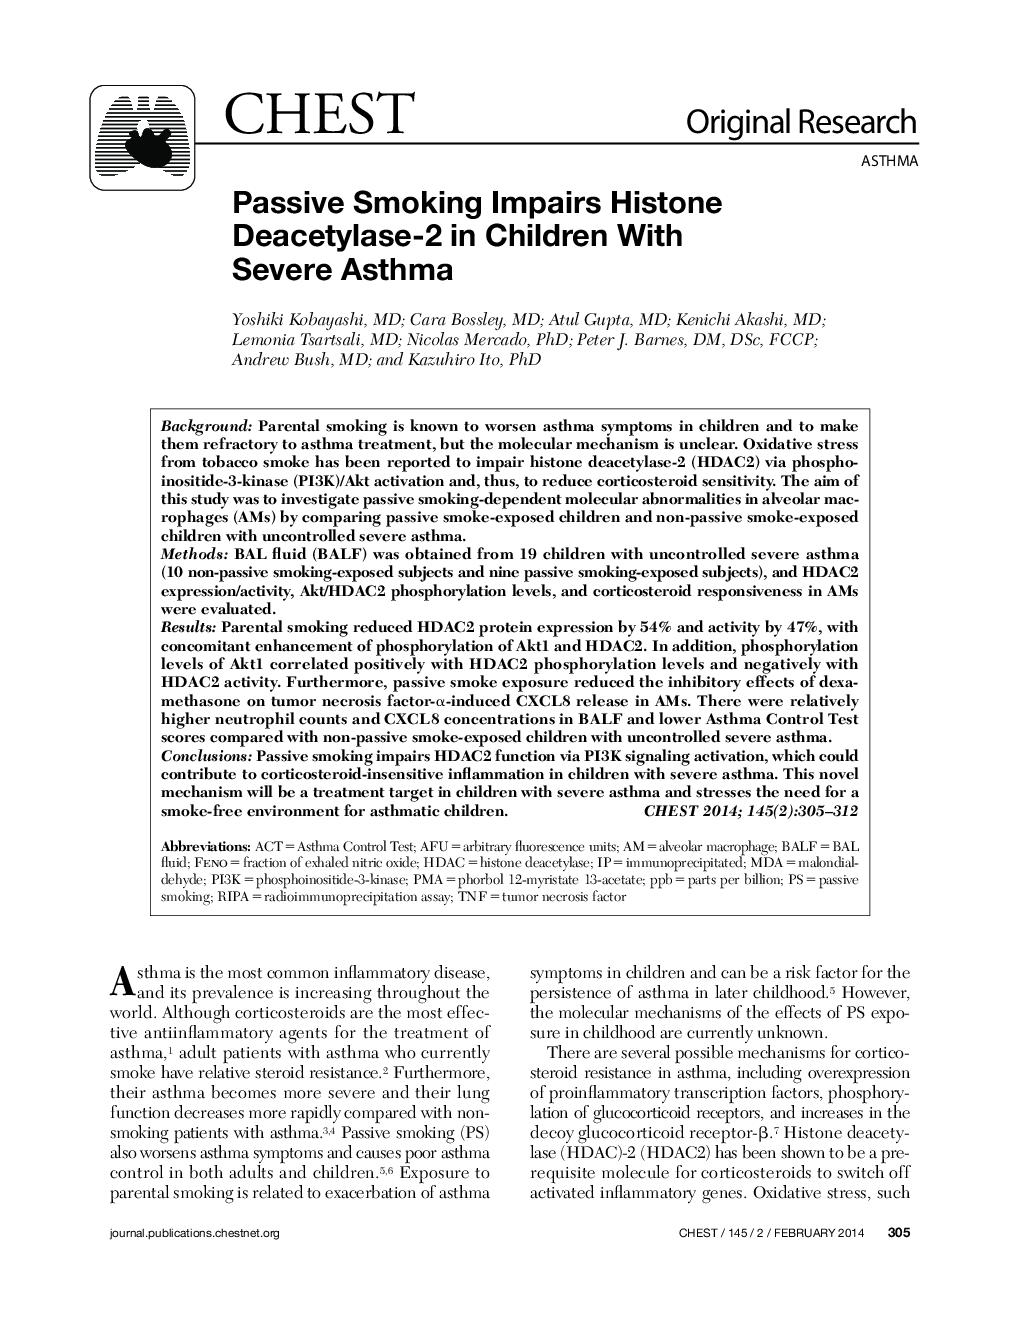 Passive Smoking Impairs Histone Deacetylase-2 in Children With Severe Asthma